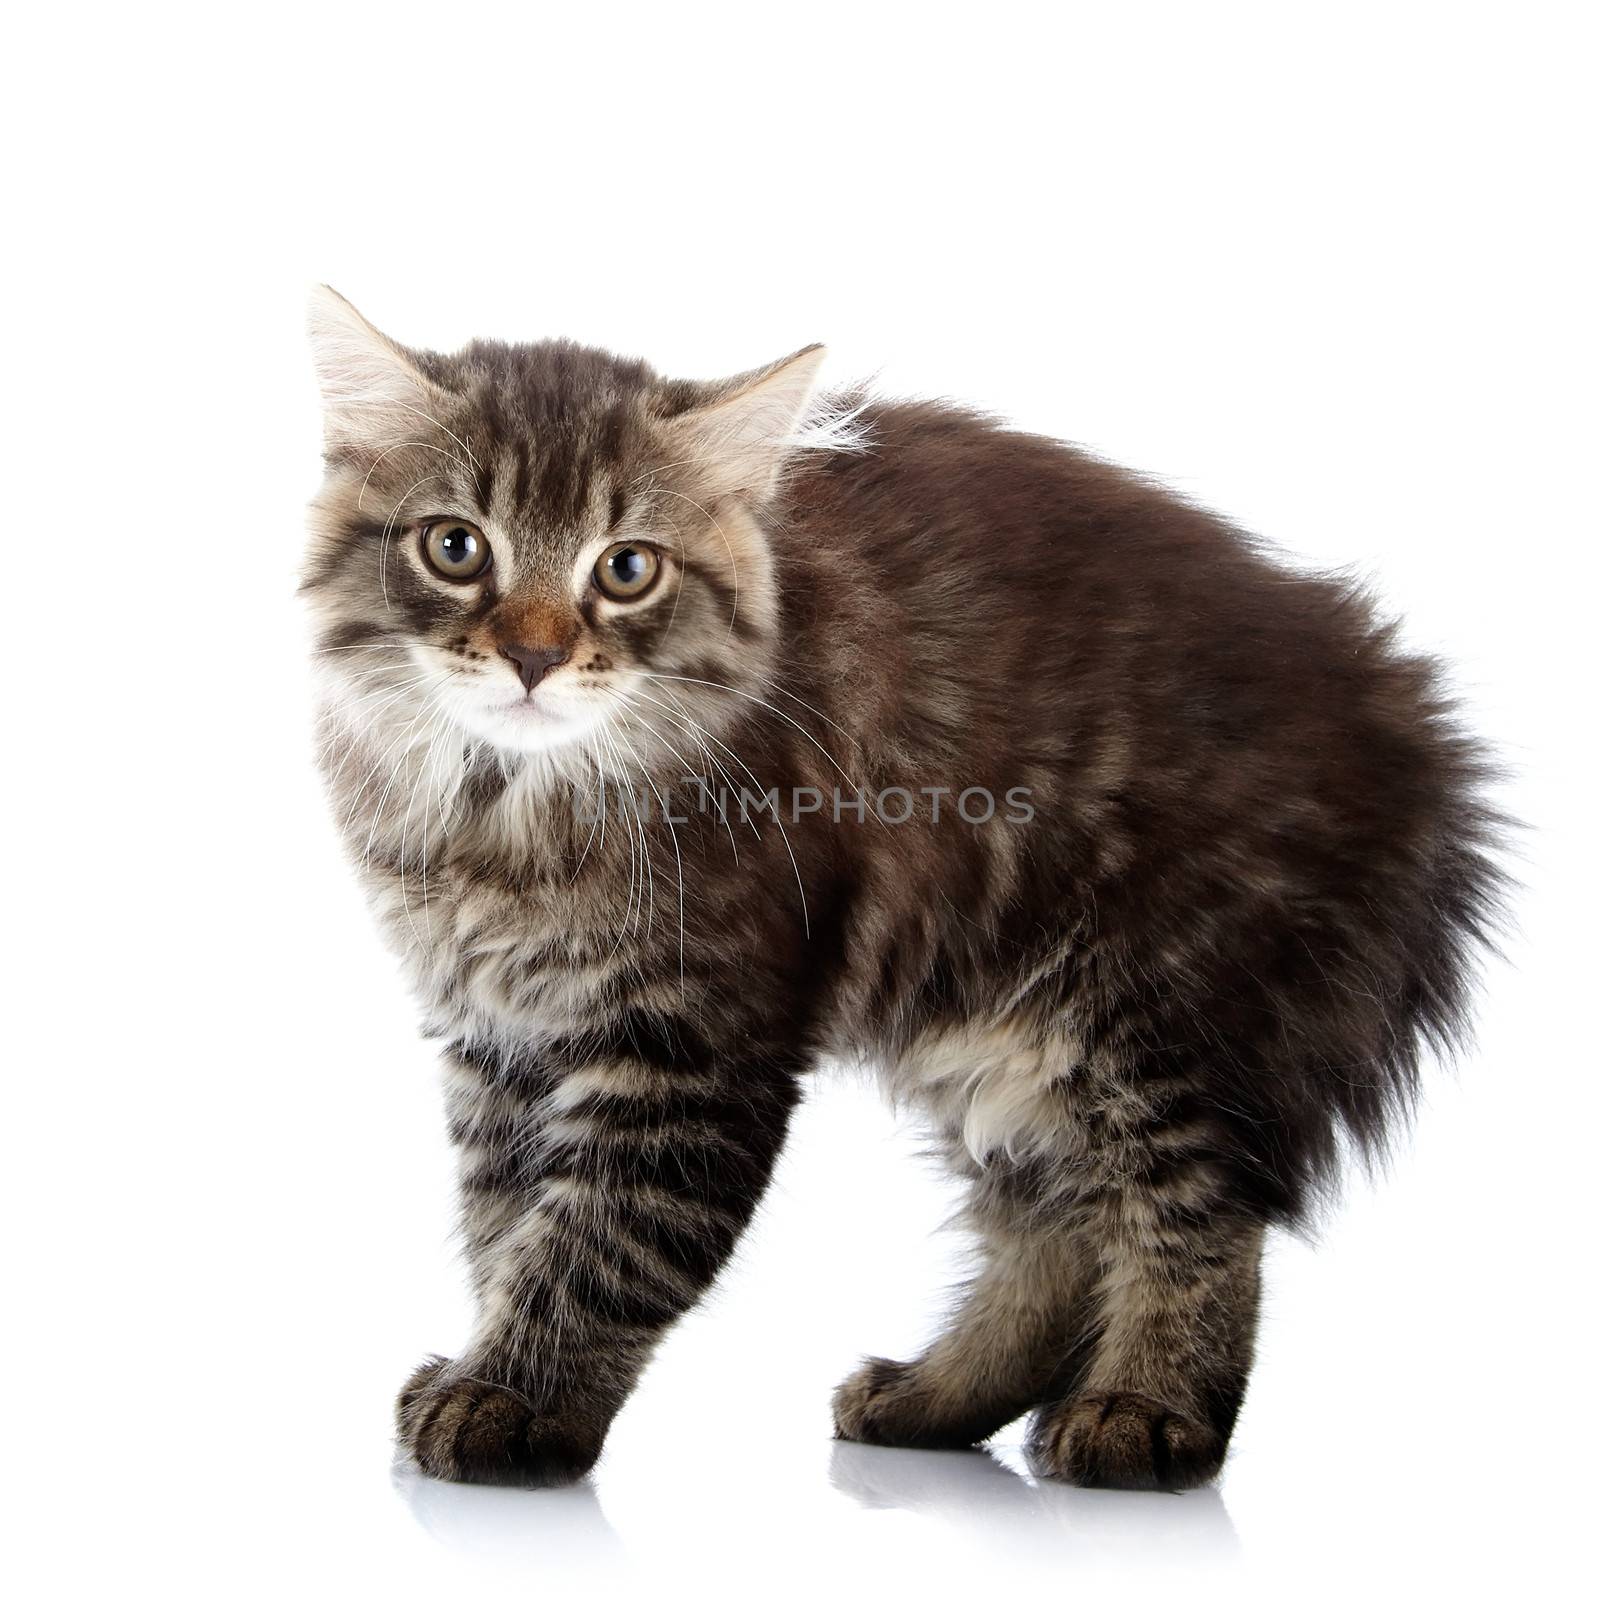 Striped fluffy angry tousled small cat by Azaliya